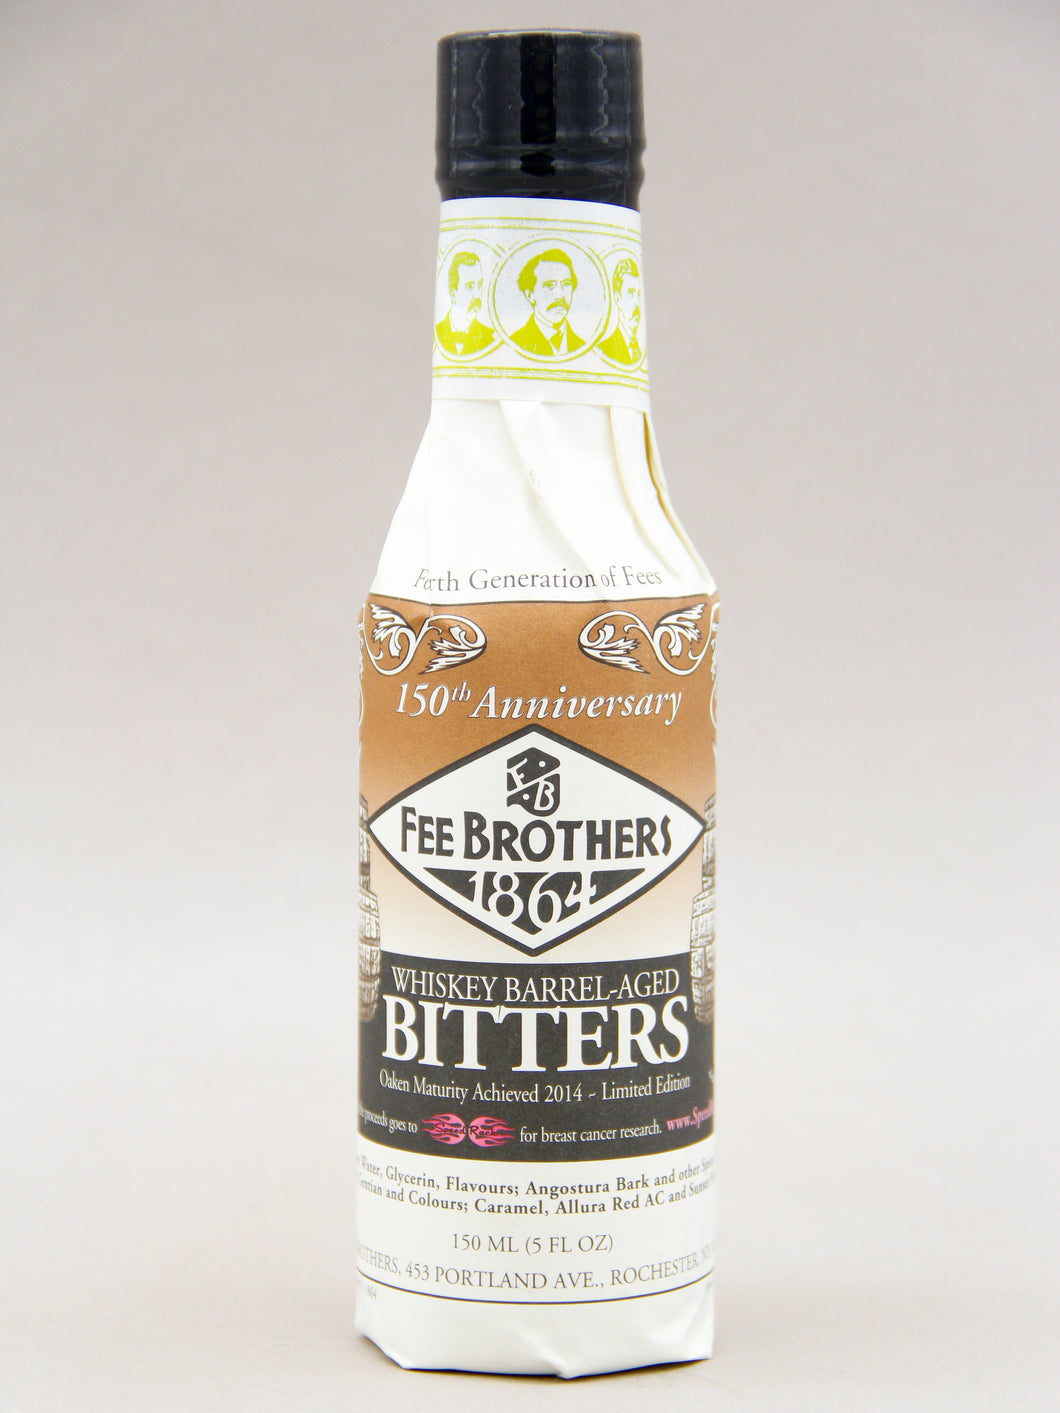 Fee Brothers Whisky Barrel Aged Bitters (17.5%, 5oz)